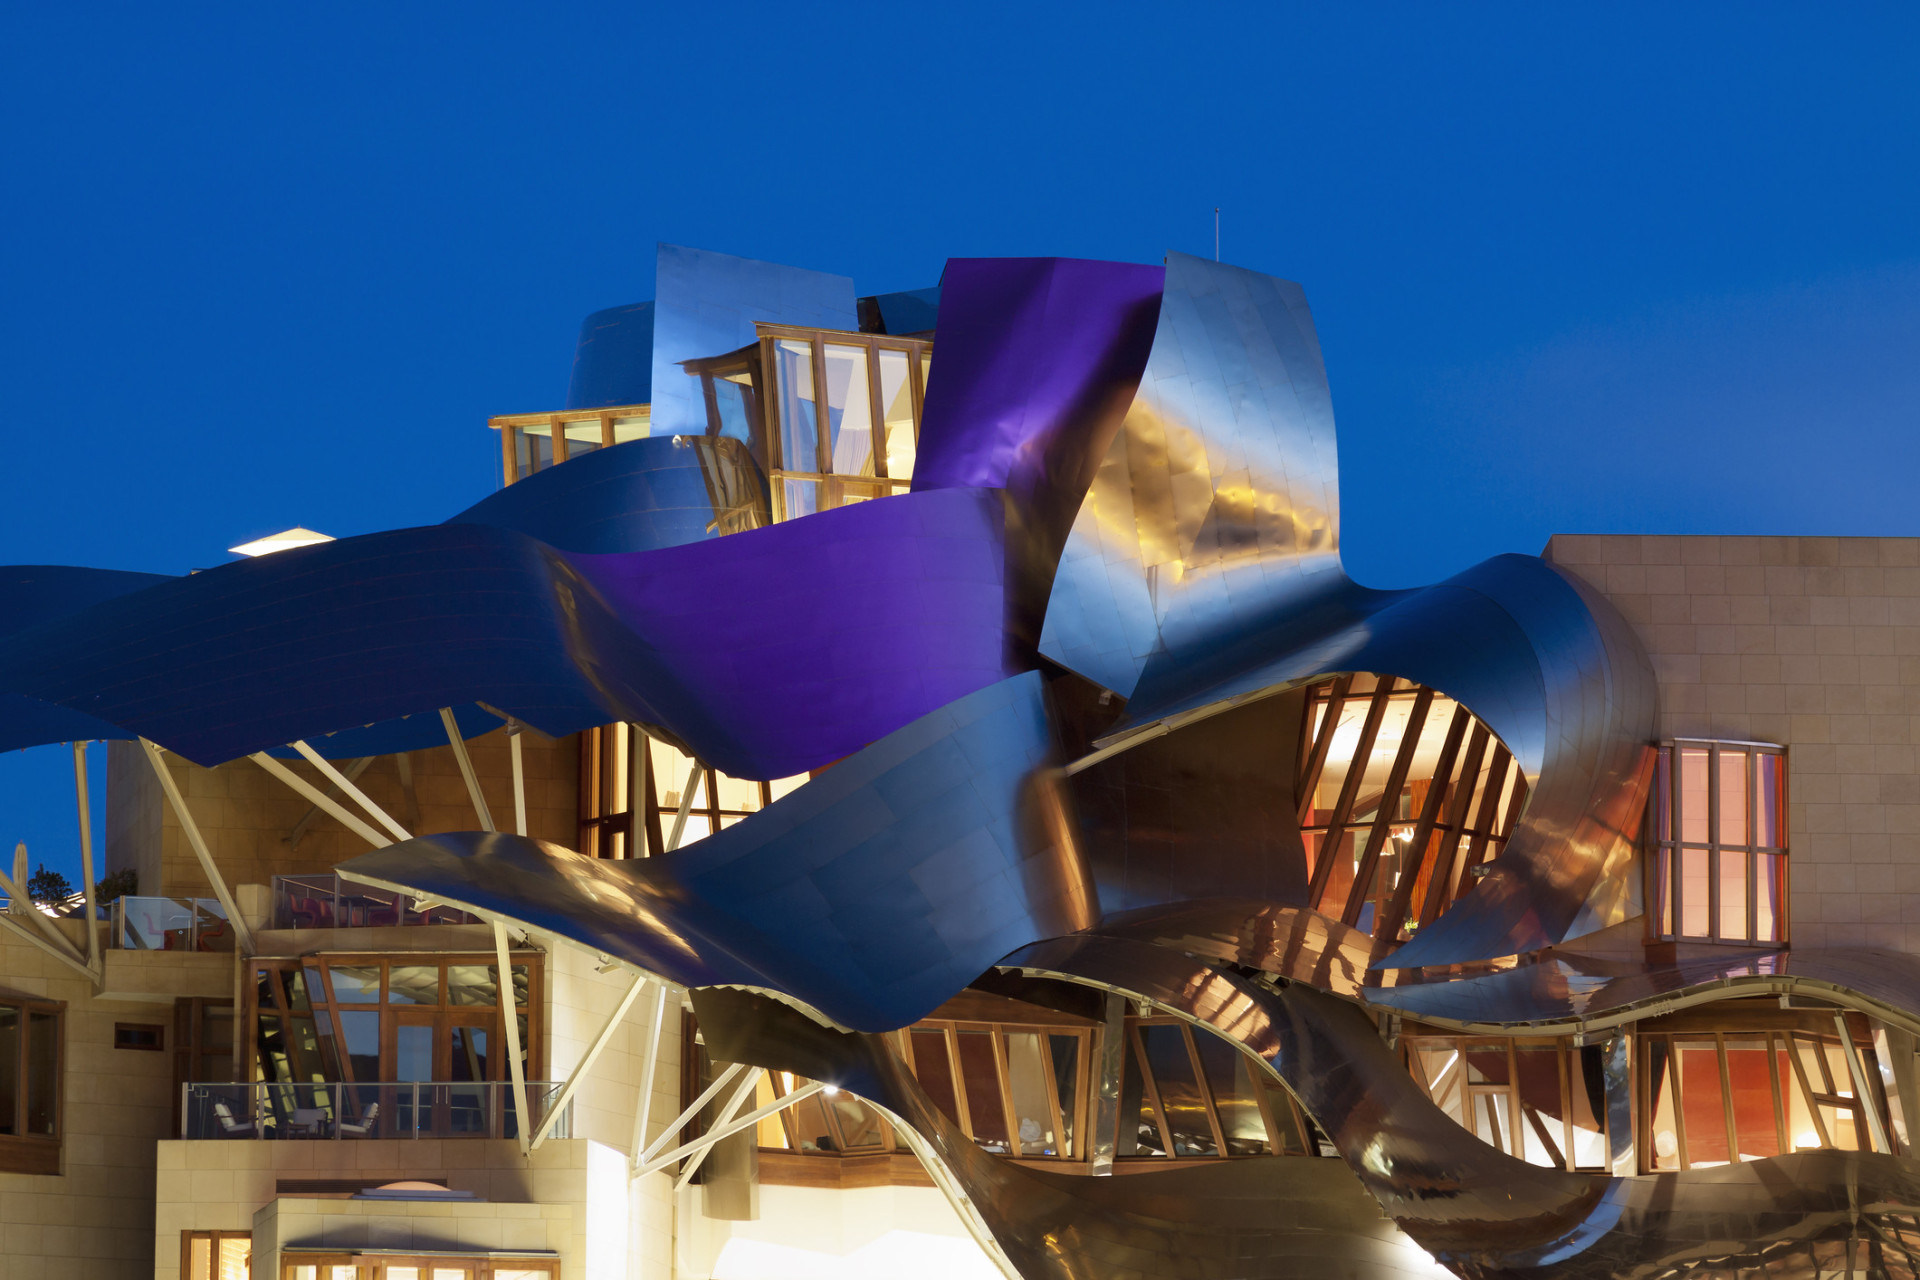 Located in Elciego is one of Spain's most remarkable hotel properties, Marqués de Riscal. Designed by acclaimed architect Frank Gehry, the building houses its own winery.<p>You may also like:<a href="https://www.starsinsider.com/n/343774?utm_source=msn.com&utm_medium=display&utm_campaign=referral_description&utm_content=223384v5en-us"> Air-time legends: the longest-running TV series ever</a></p>